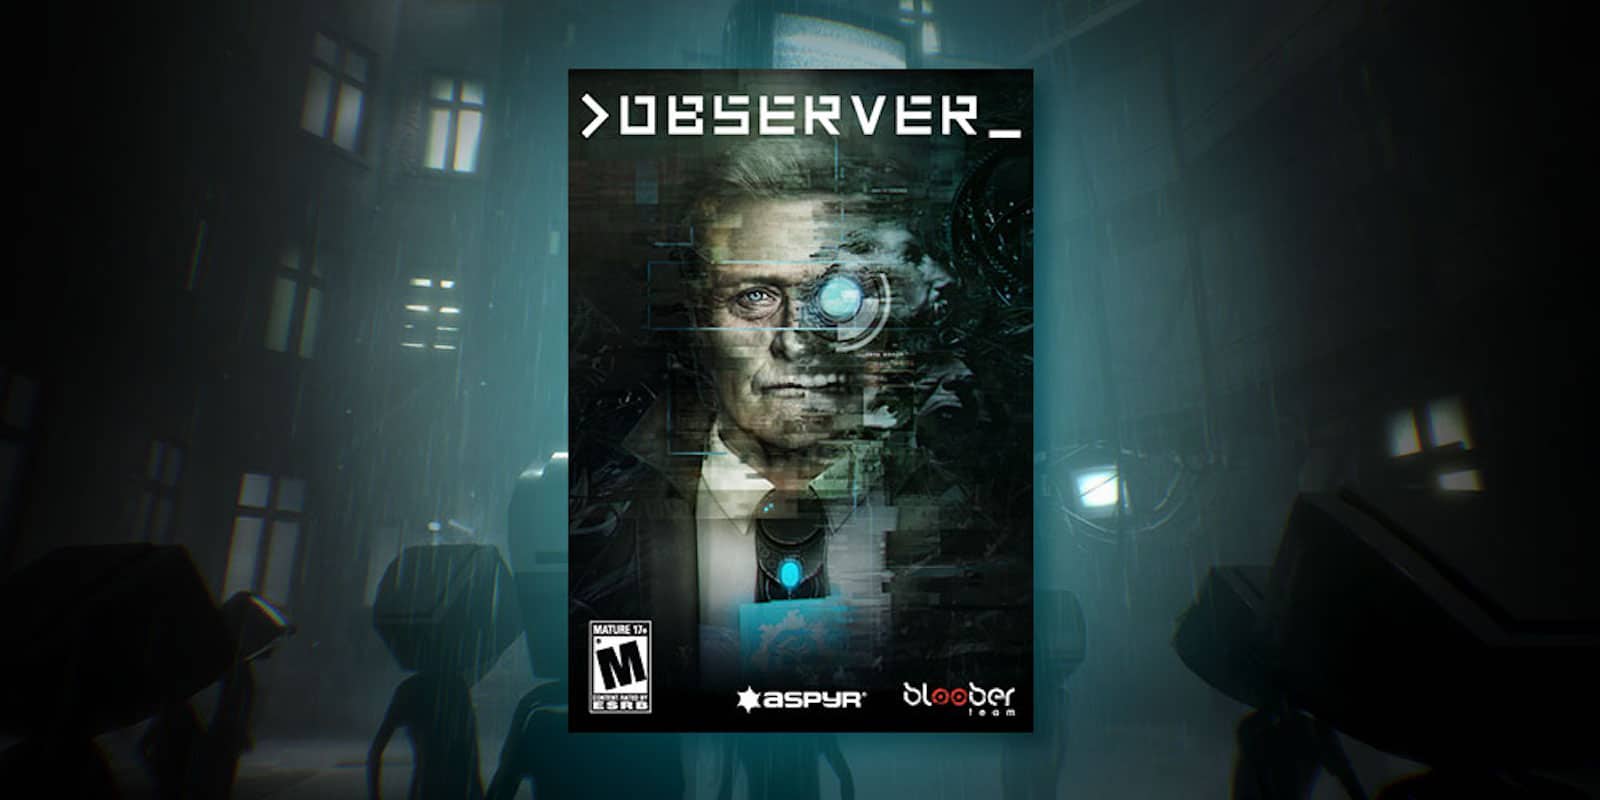 Play the role of a neural detective in this genre-defining cyberpunk horror game.